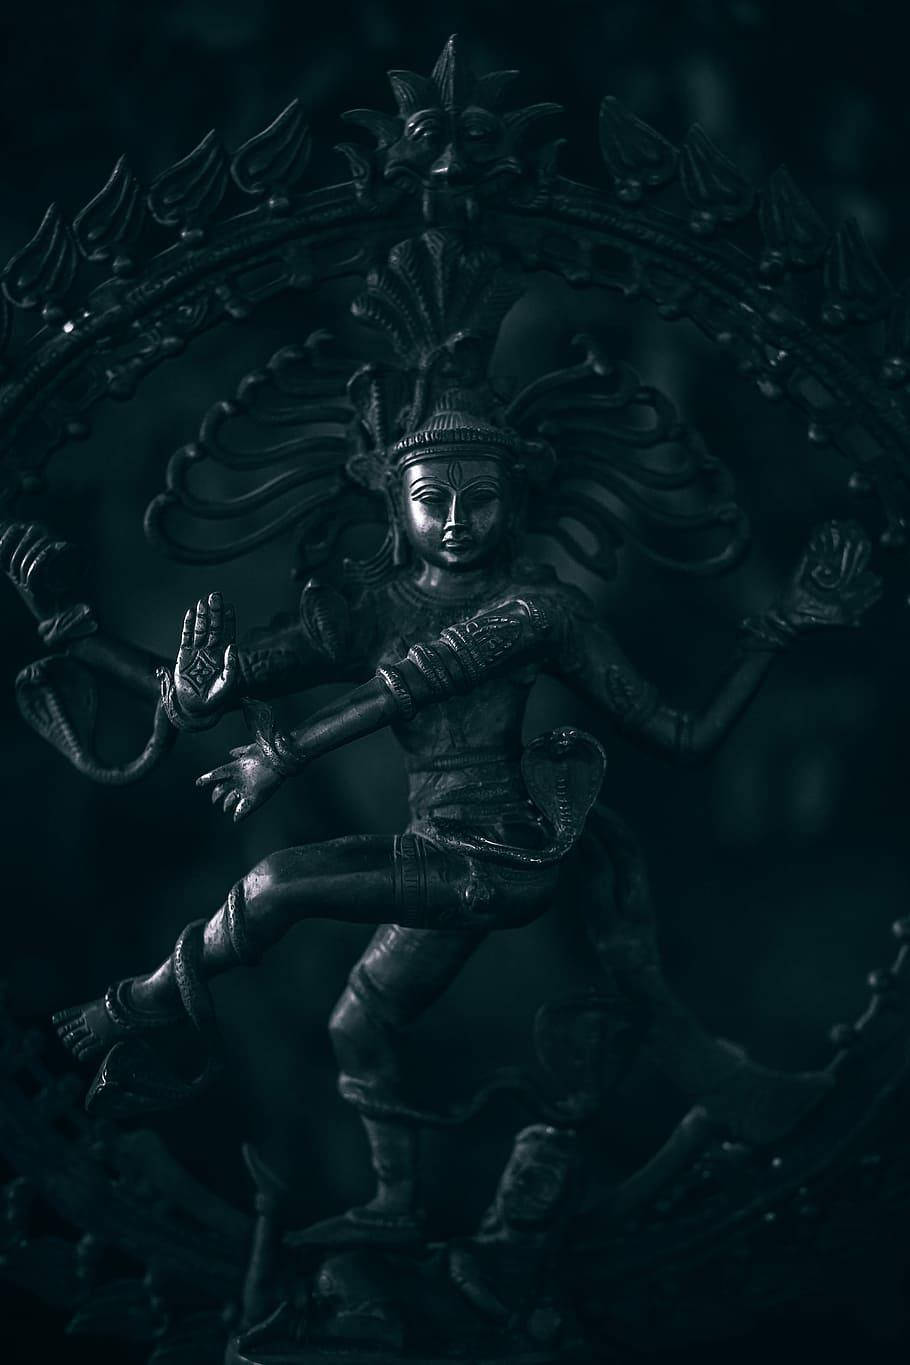 Download Lord Shiva Mobile Wallpaper Background